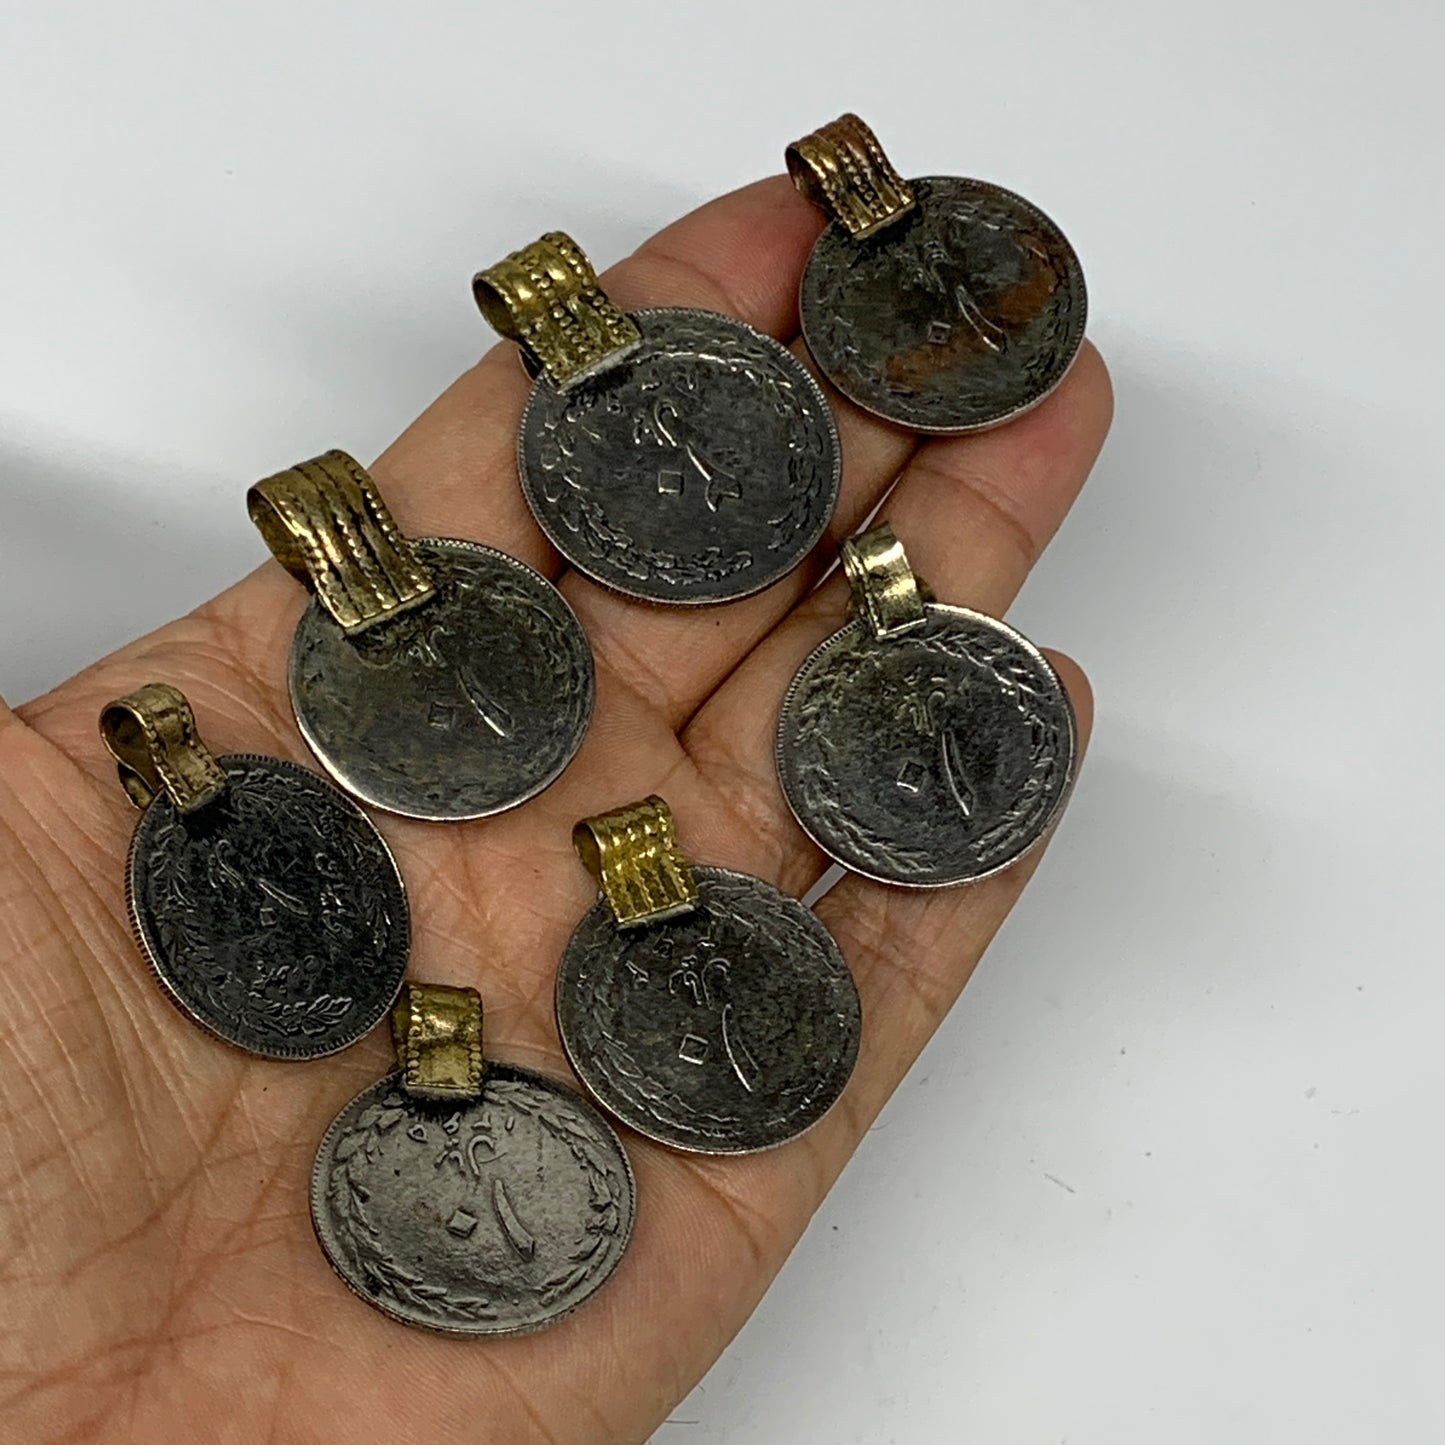 64g, 7pcs, Turkmen Coins Jeweled Synthetic Pink Tribal @Afghanistan, B14551